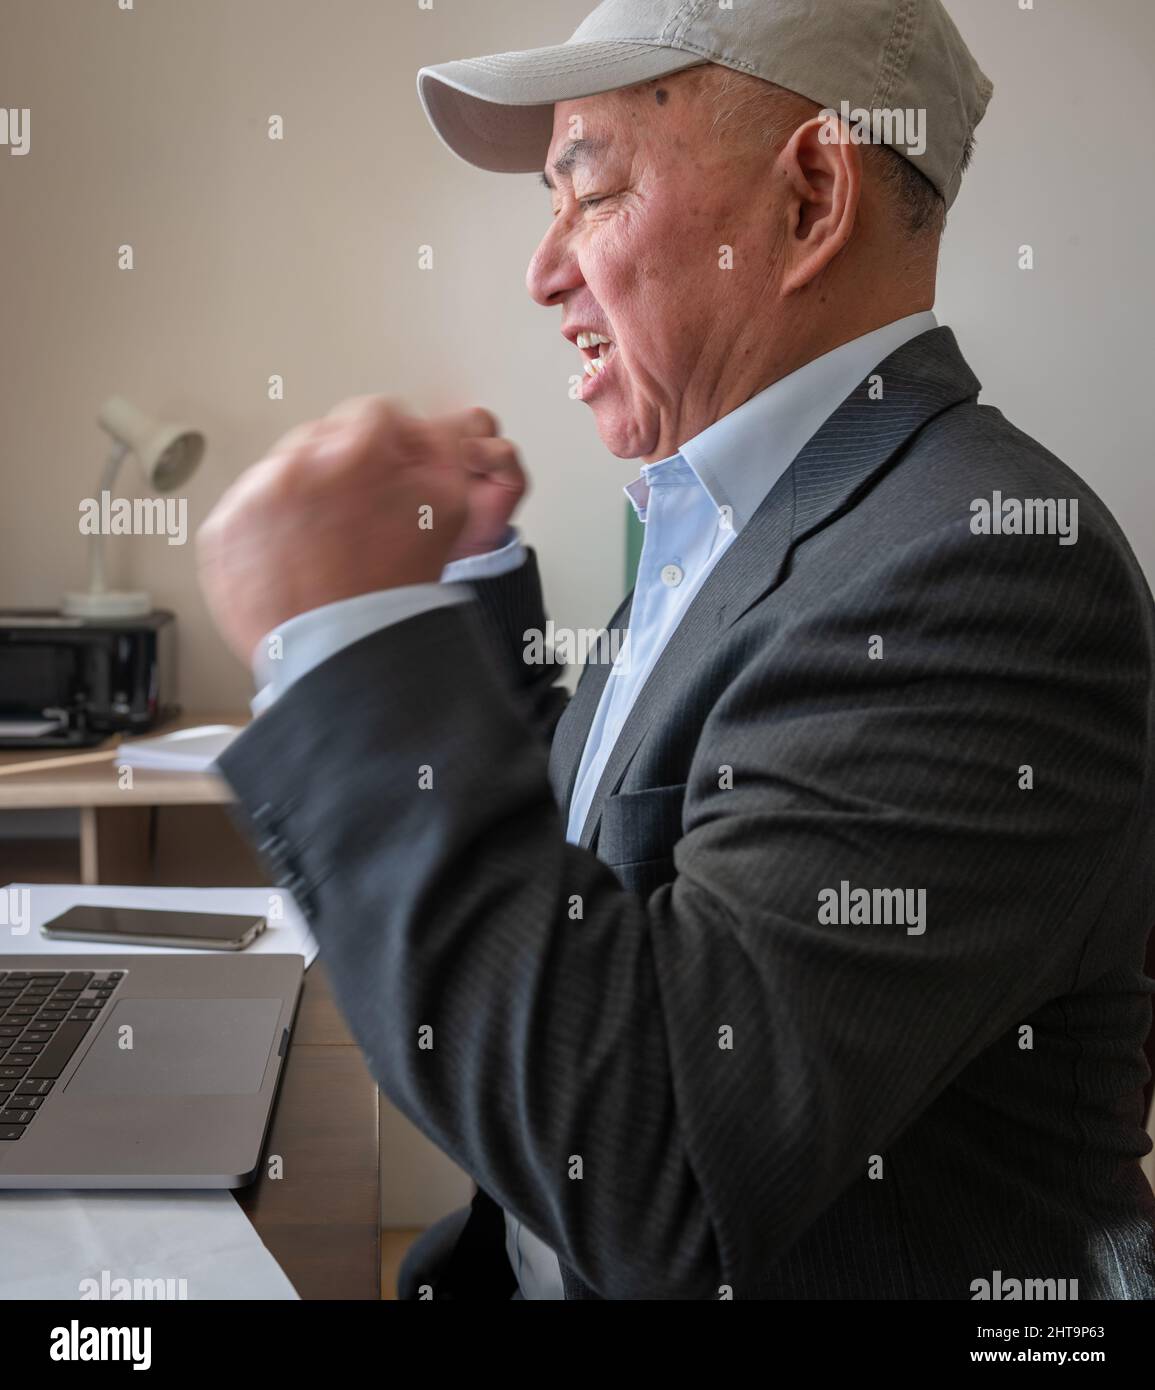 A business man  in the office with an excited expression after closing a big deal online. Business success concept. Stock Photo